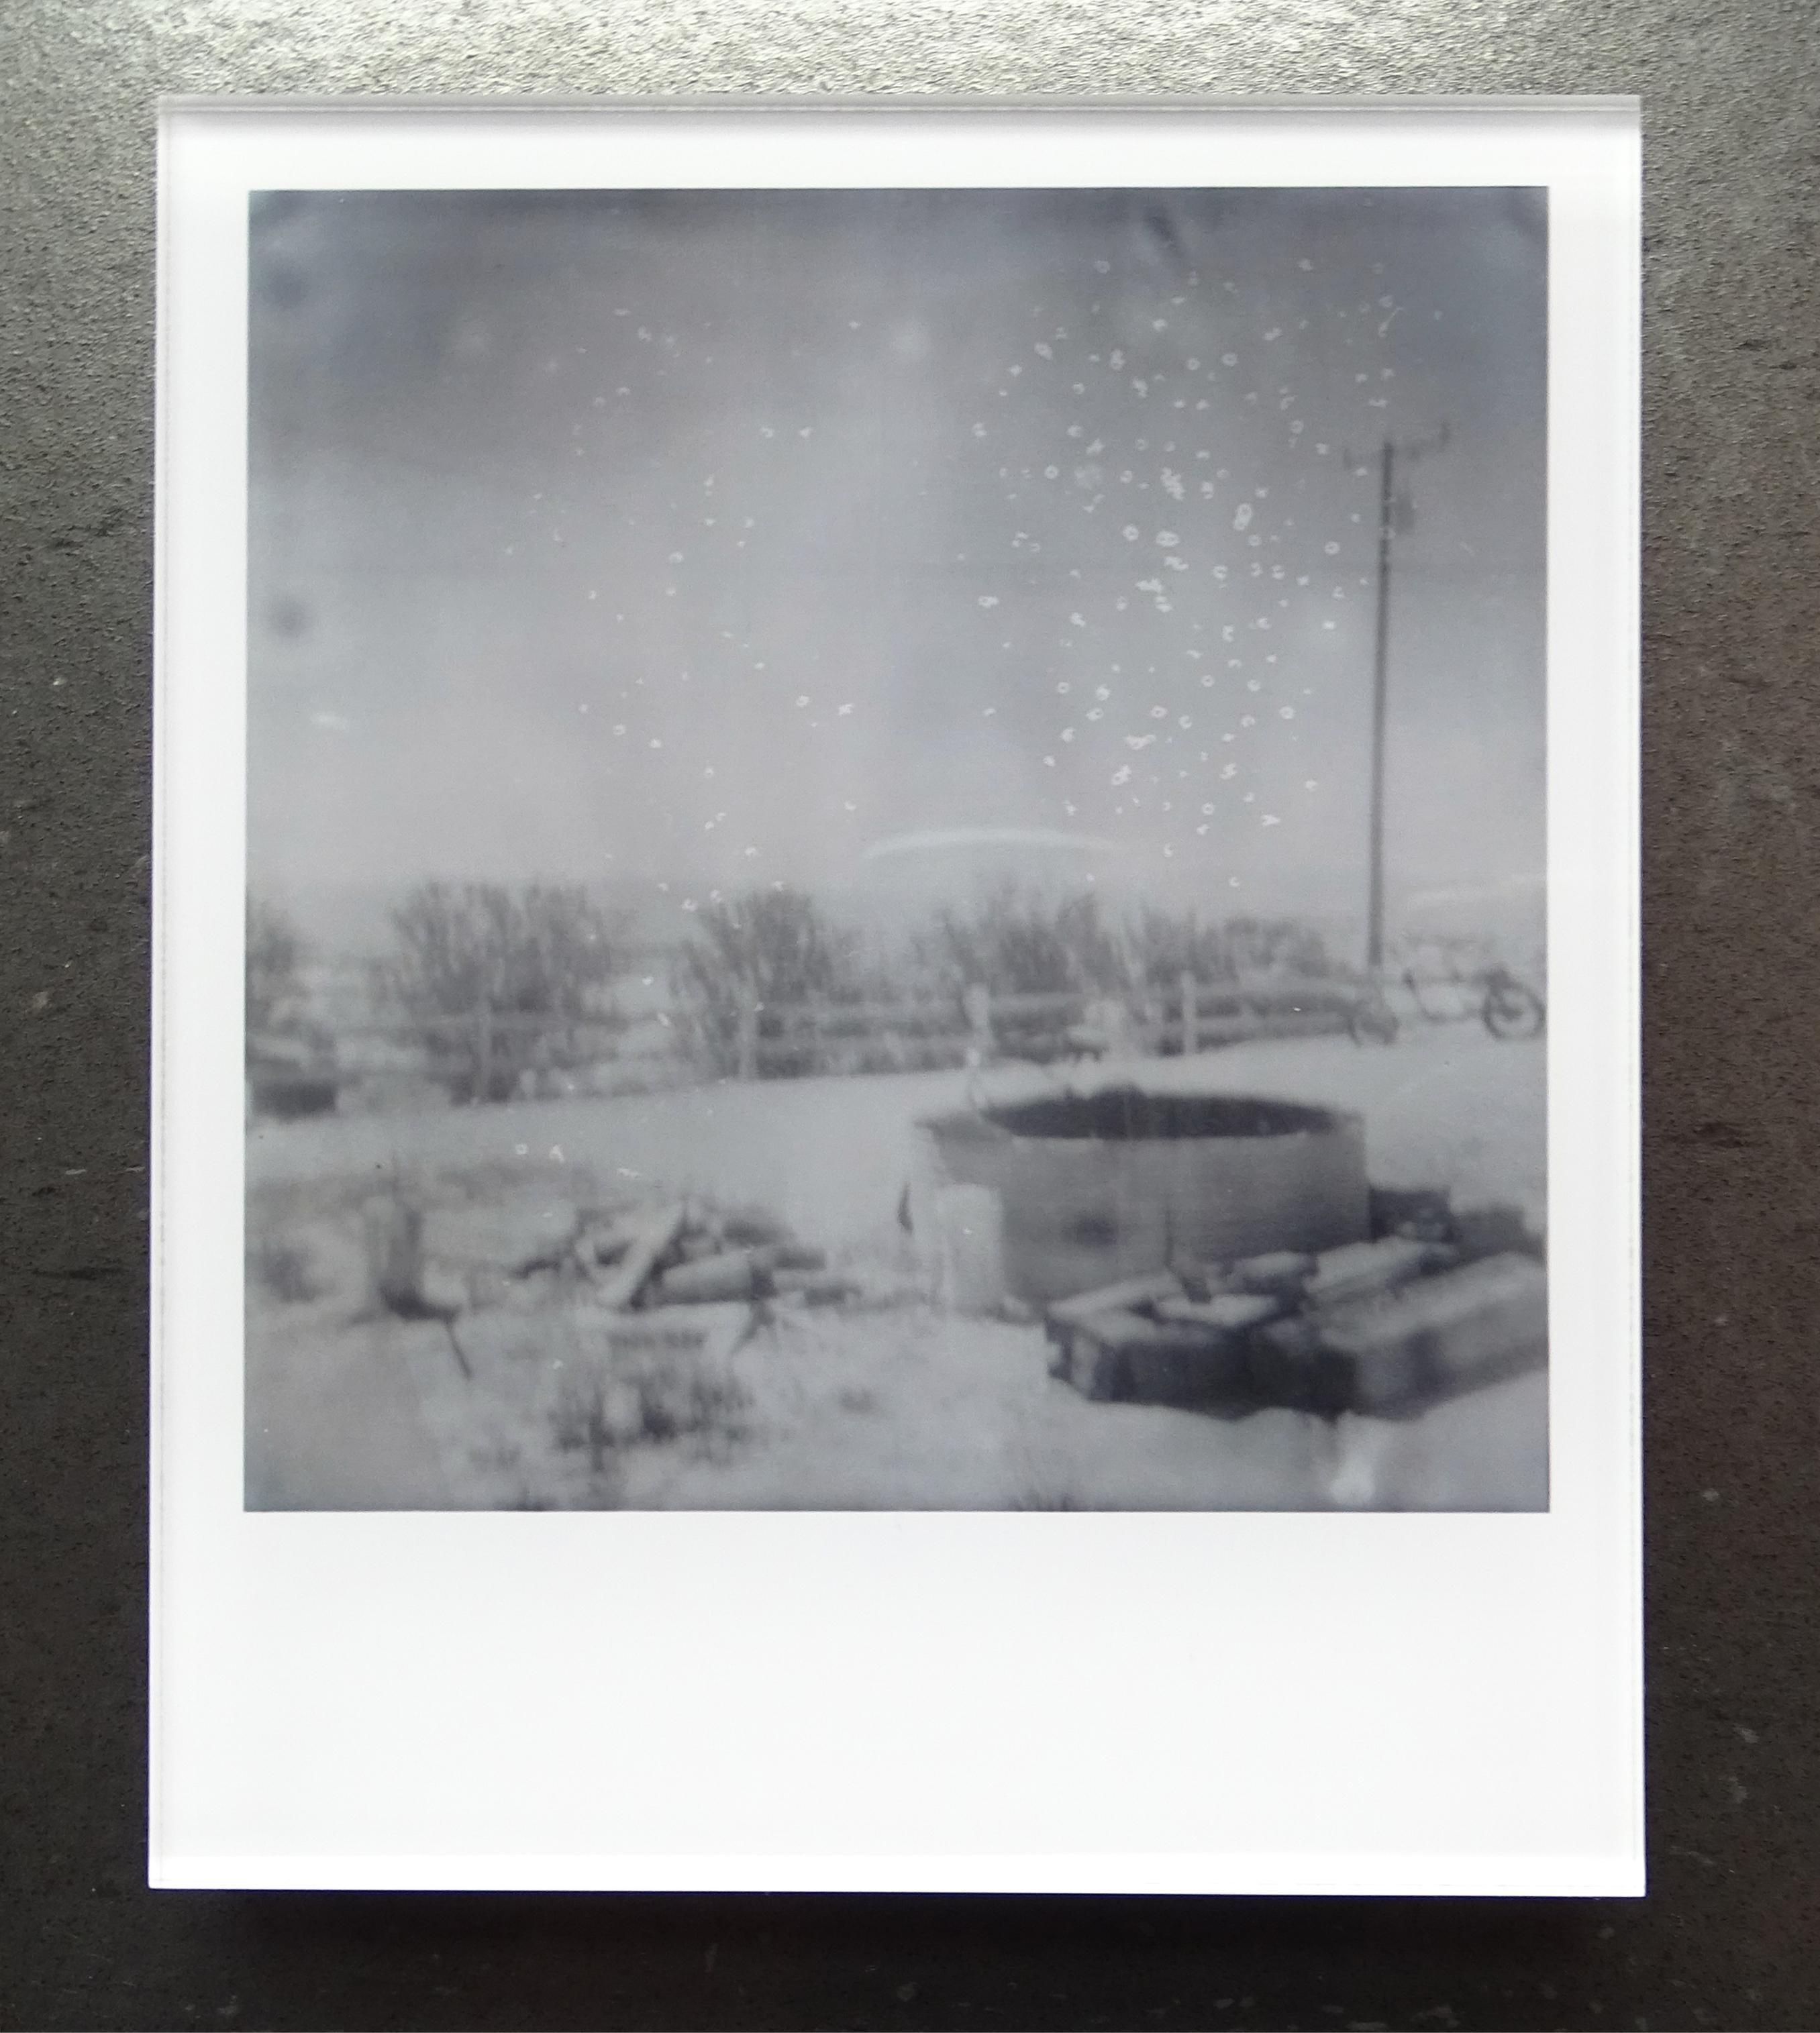 Stefanie Schneider's Minis
Summer Snow (Sidewinder), 2005

Signed and signature brand on verso.
Lambda digital Color Photographs based on a Polaroid.
Sandwiched in between Plexiglass (thickness 0.7cm)

Polaroid sized open Editions 1999-2013
10.7 x